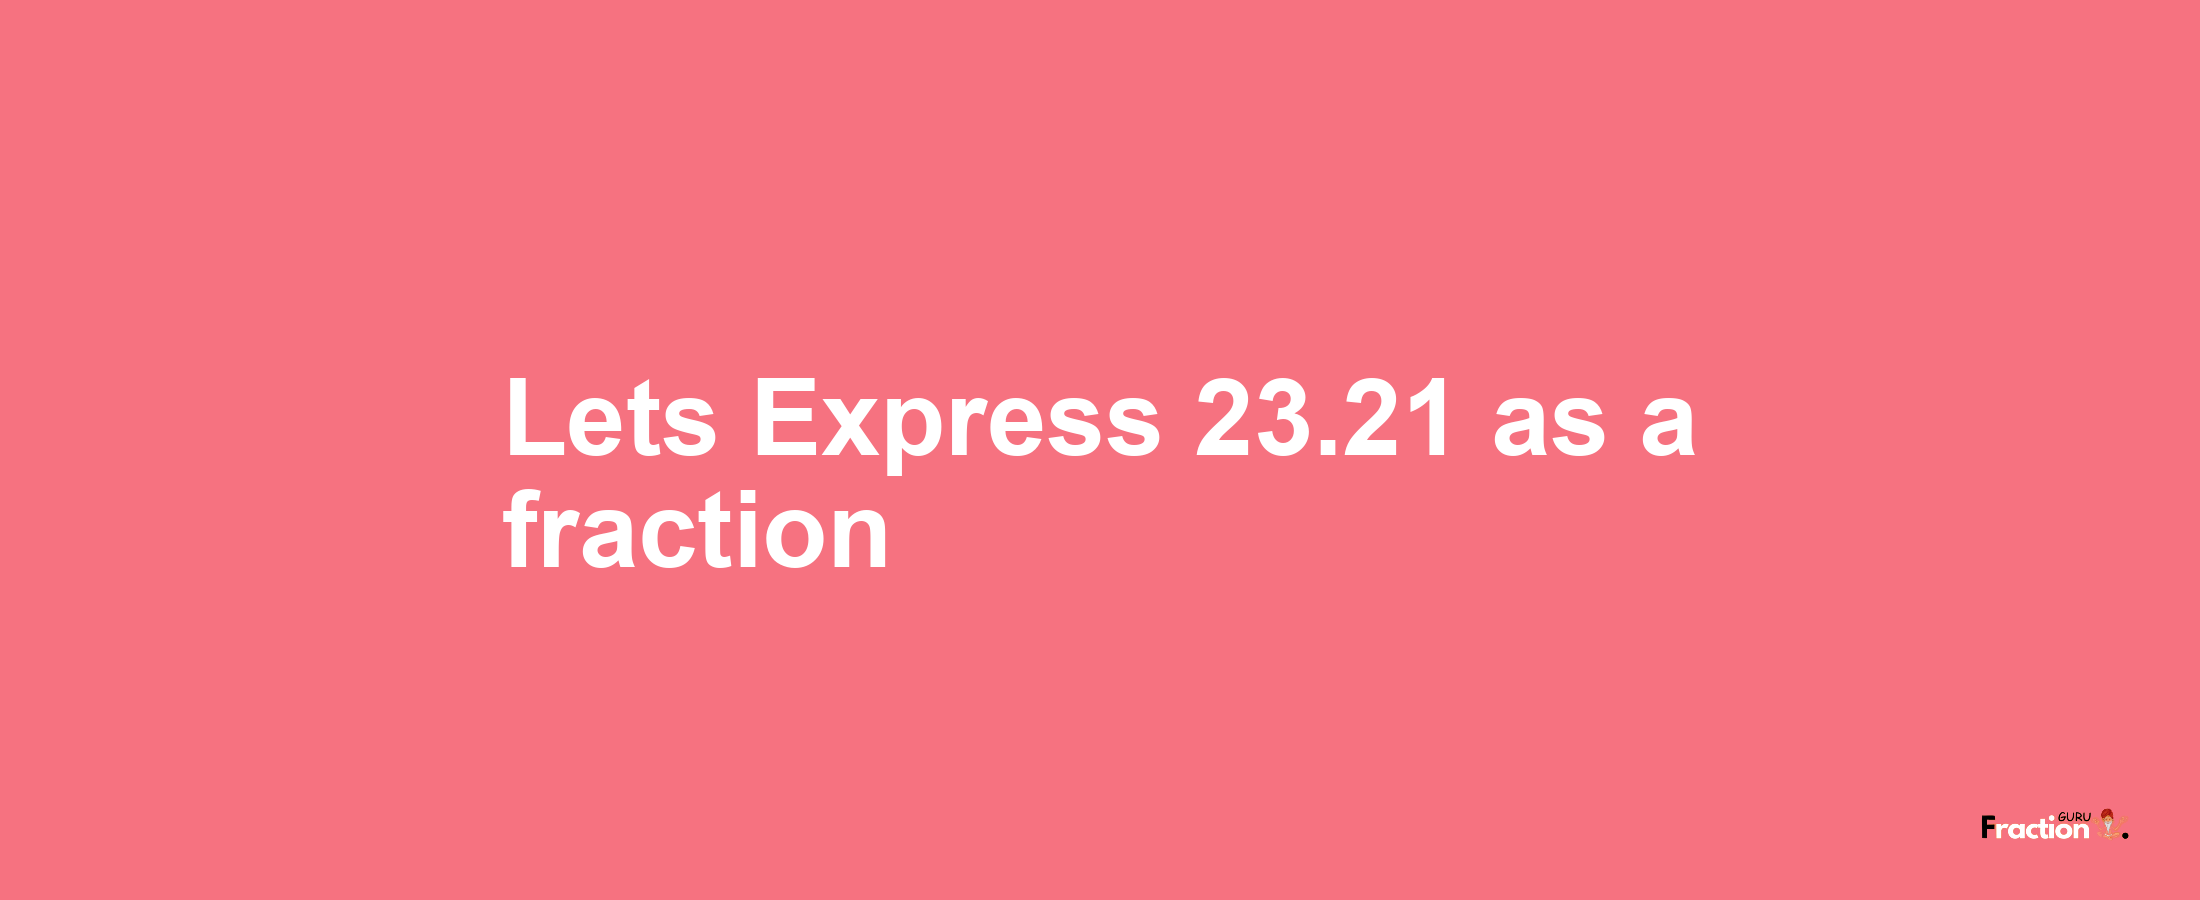 Lets Express 23.21 as afraction